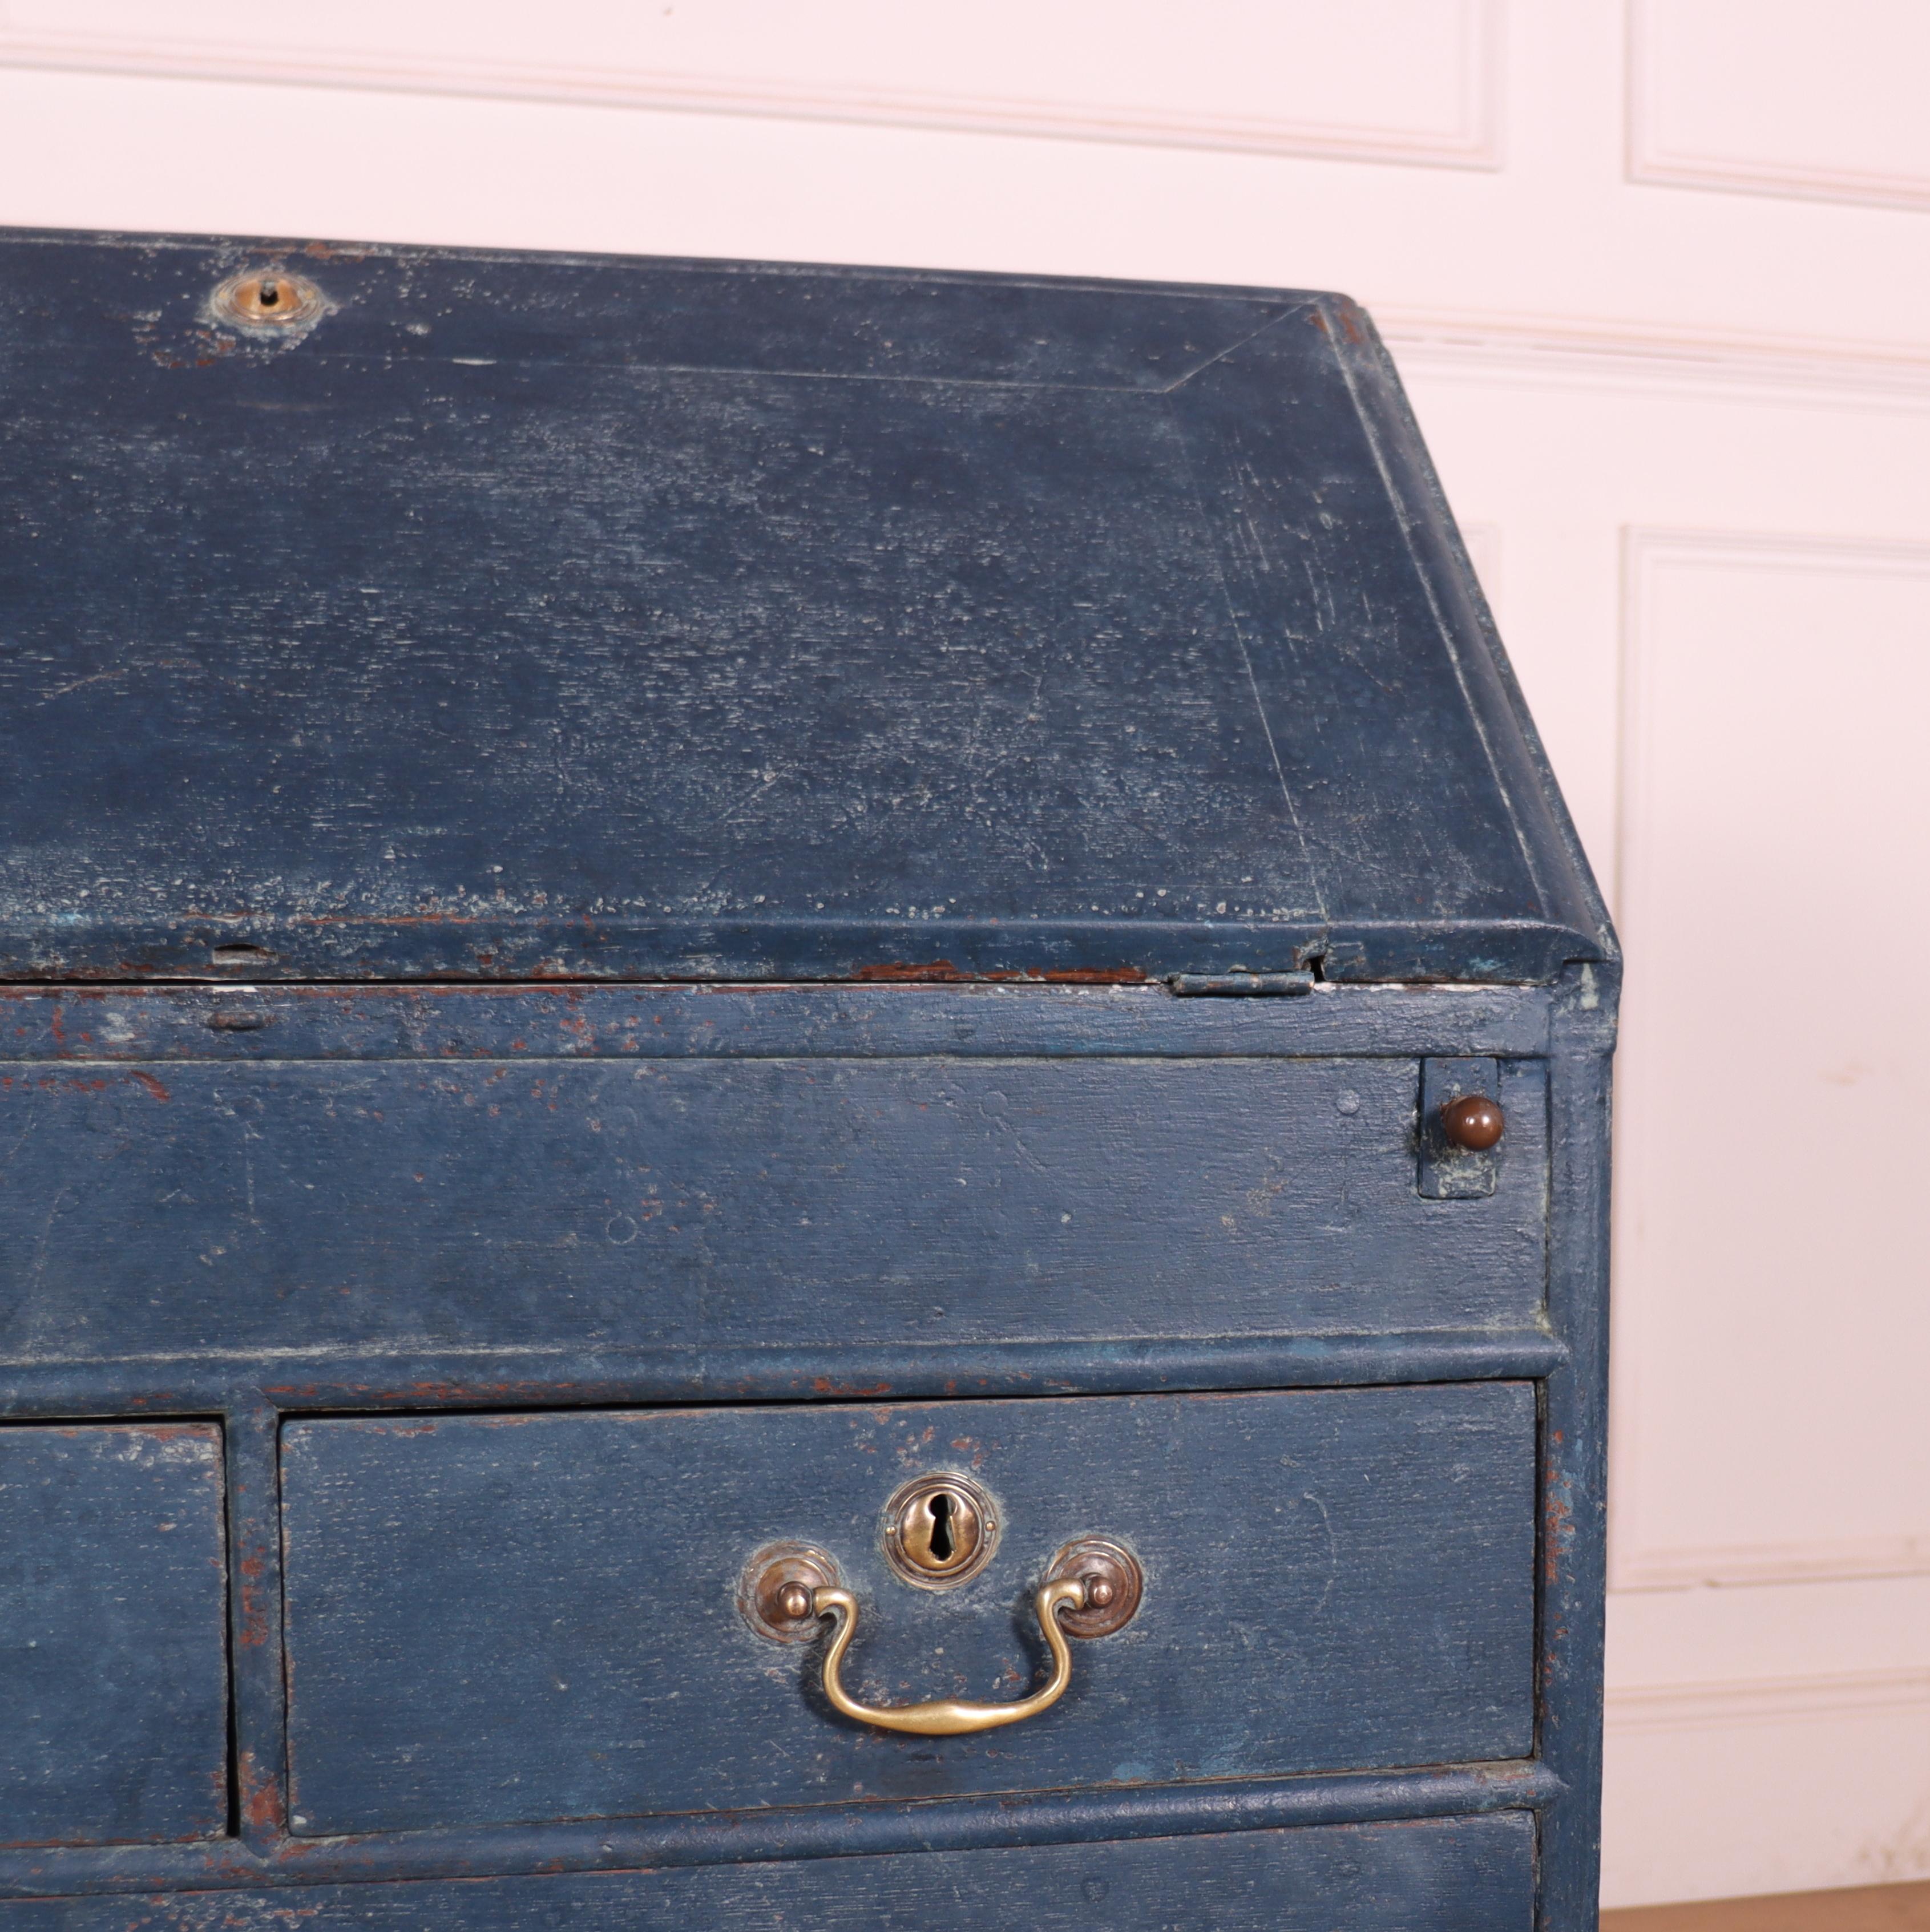 18th Century and Earlier 18th Century Painted Bureau